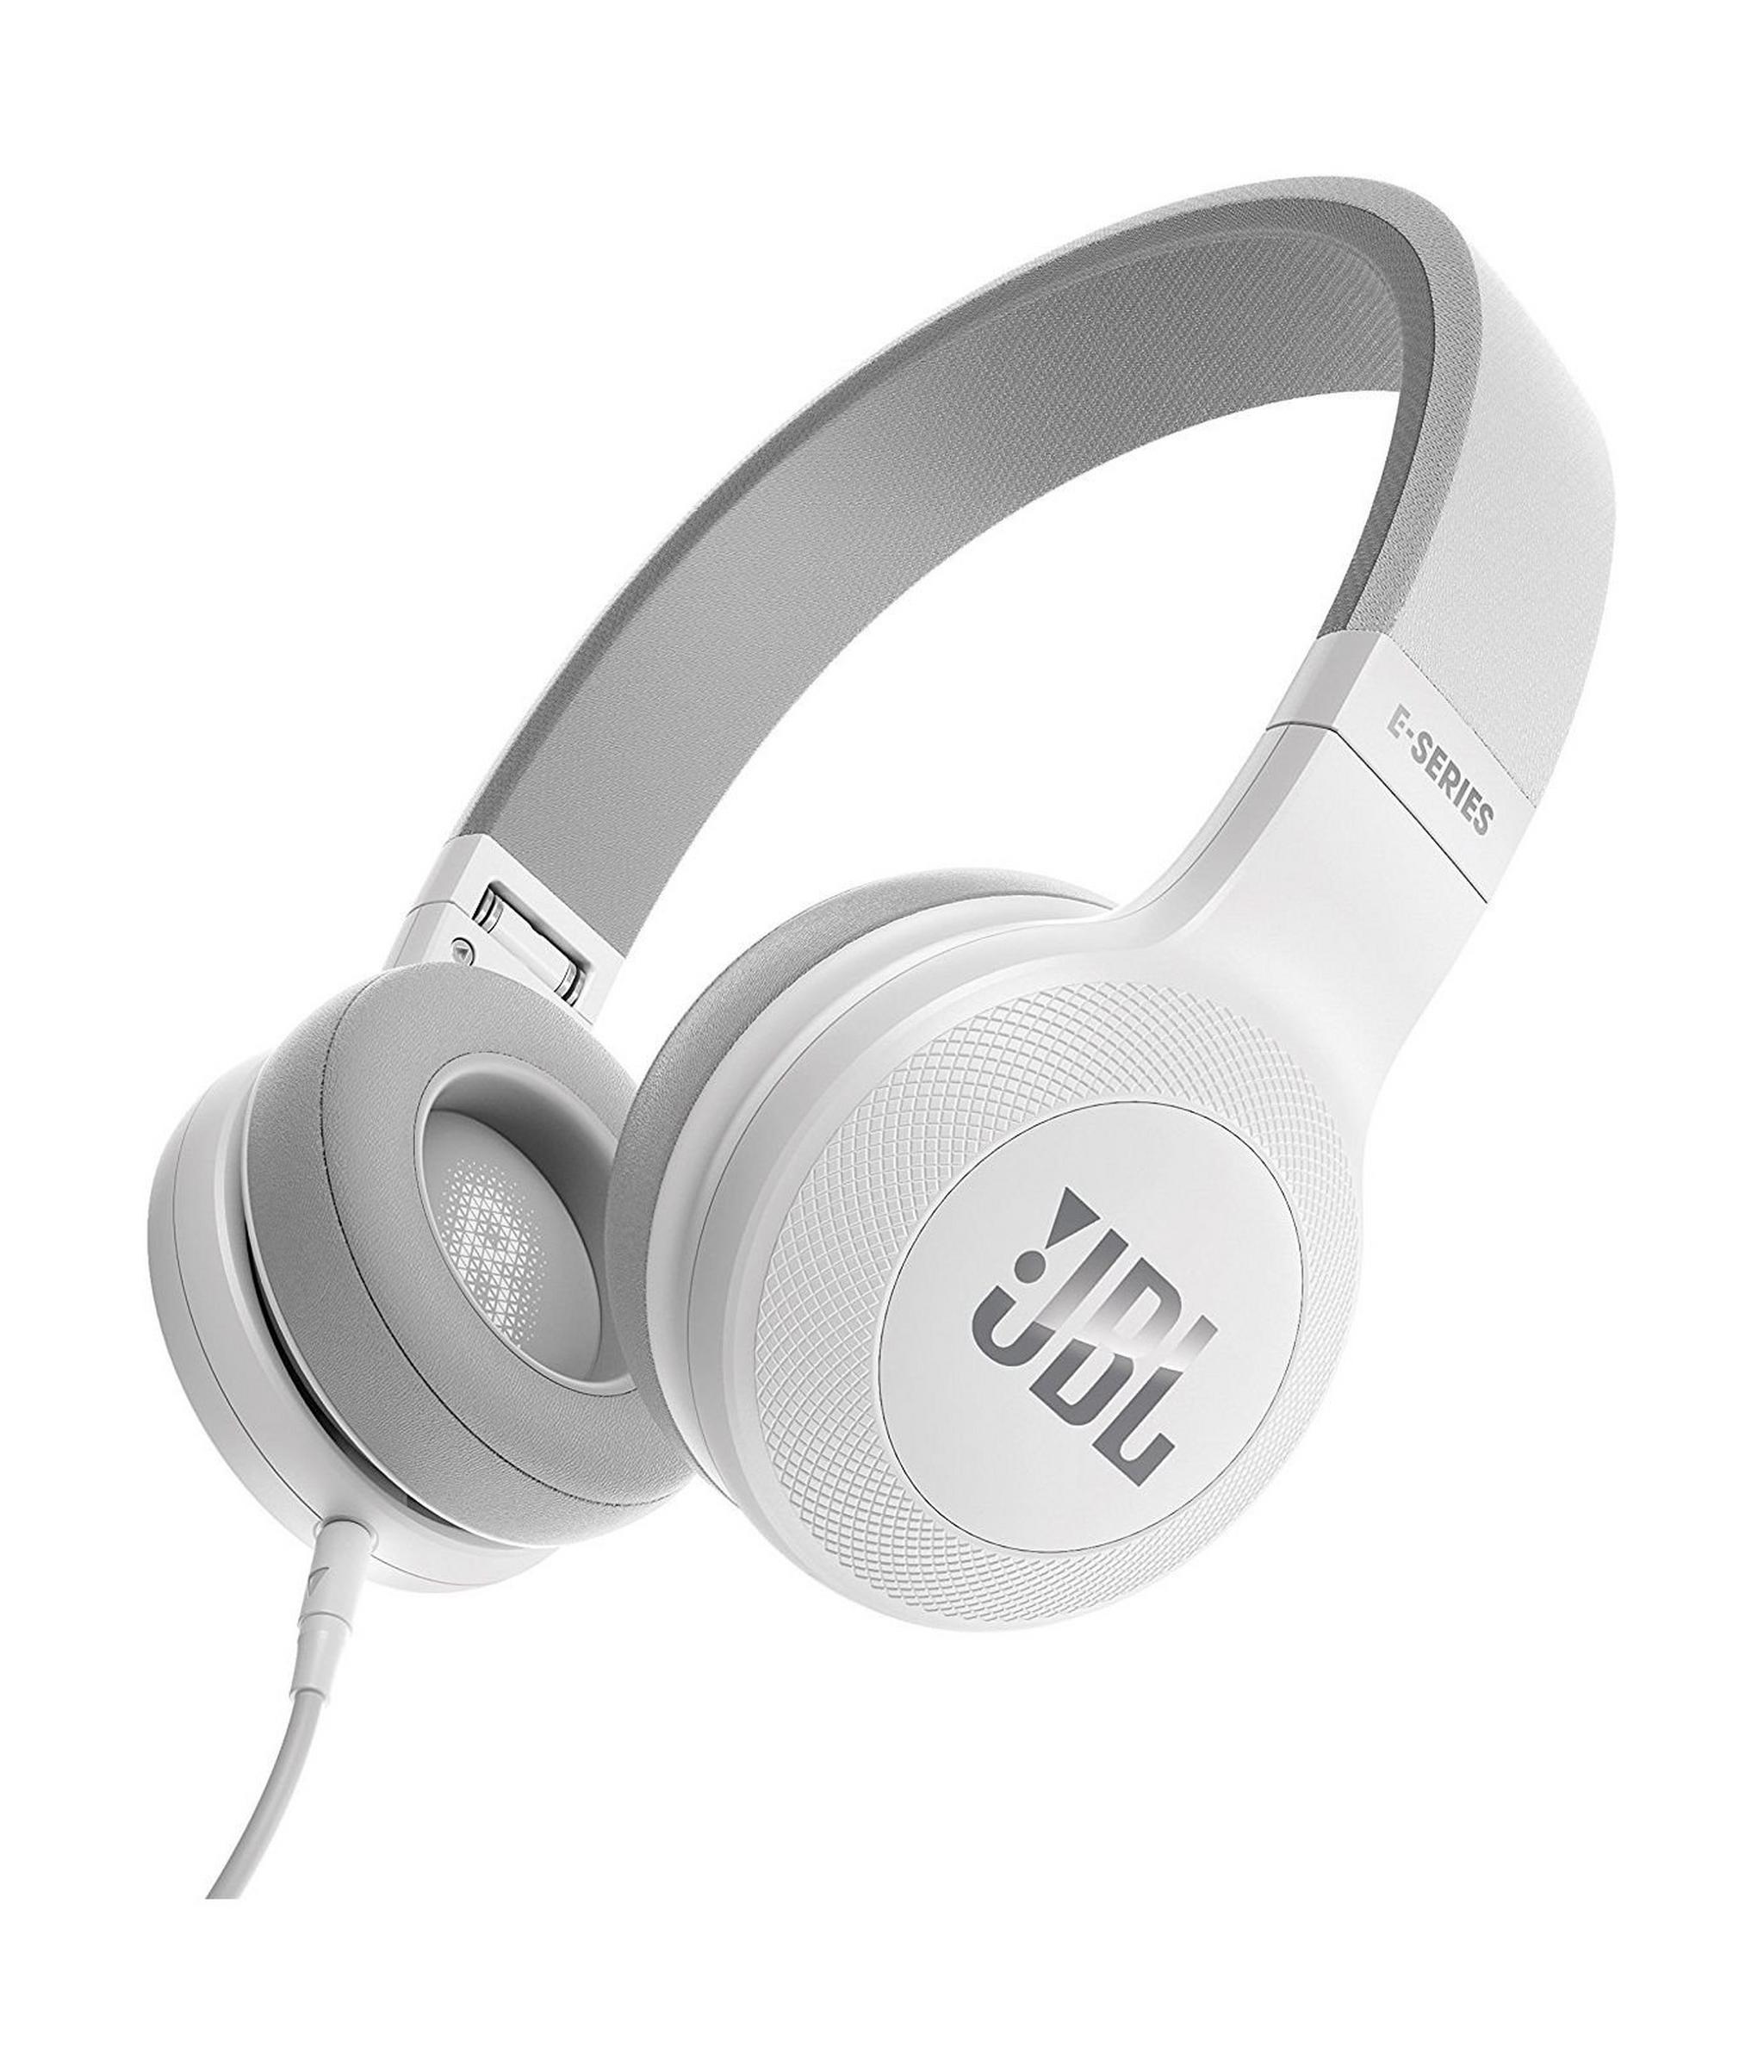 JBL E35 Over-Ear Wired Headphone with Microphone - White